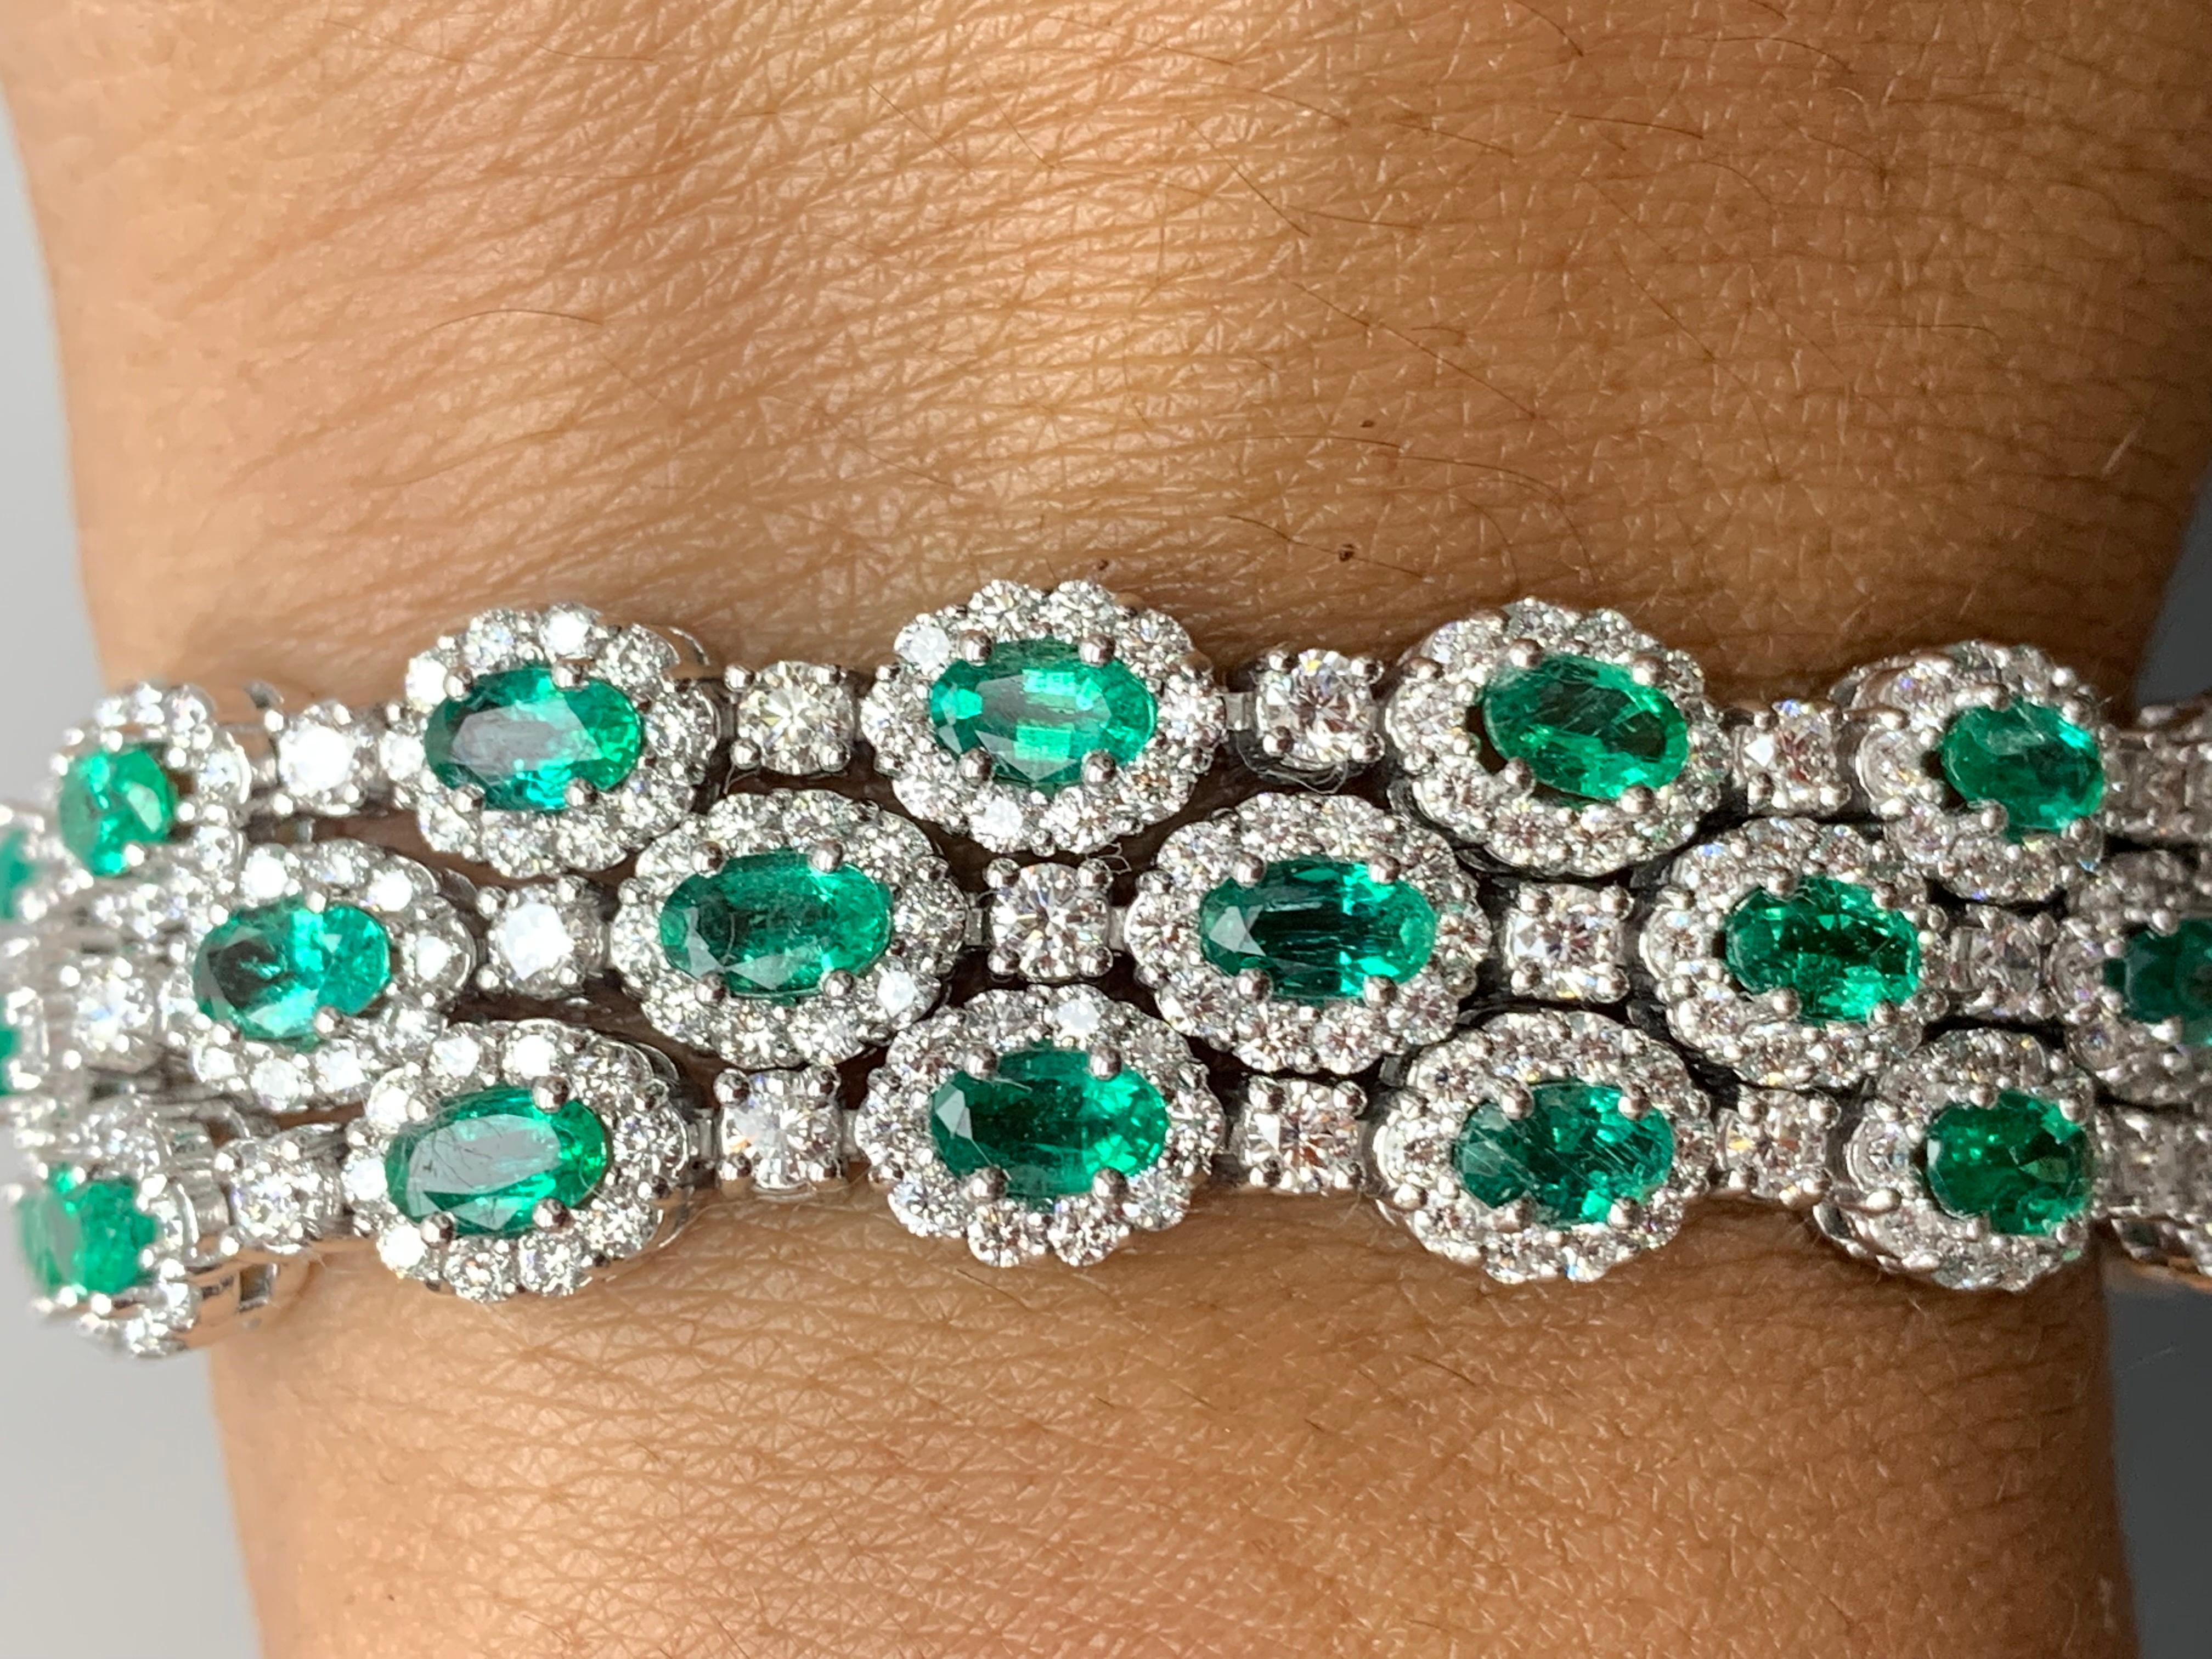 10.95 Carat Oval Cut Emerald and Diamond 3 Row Bracelet in 14K White Gold For Sale 9